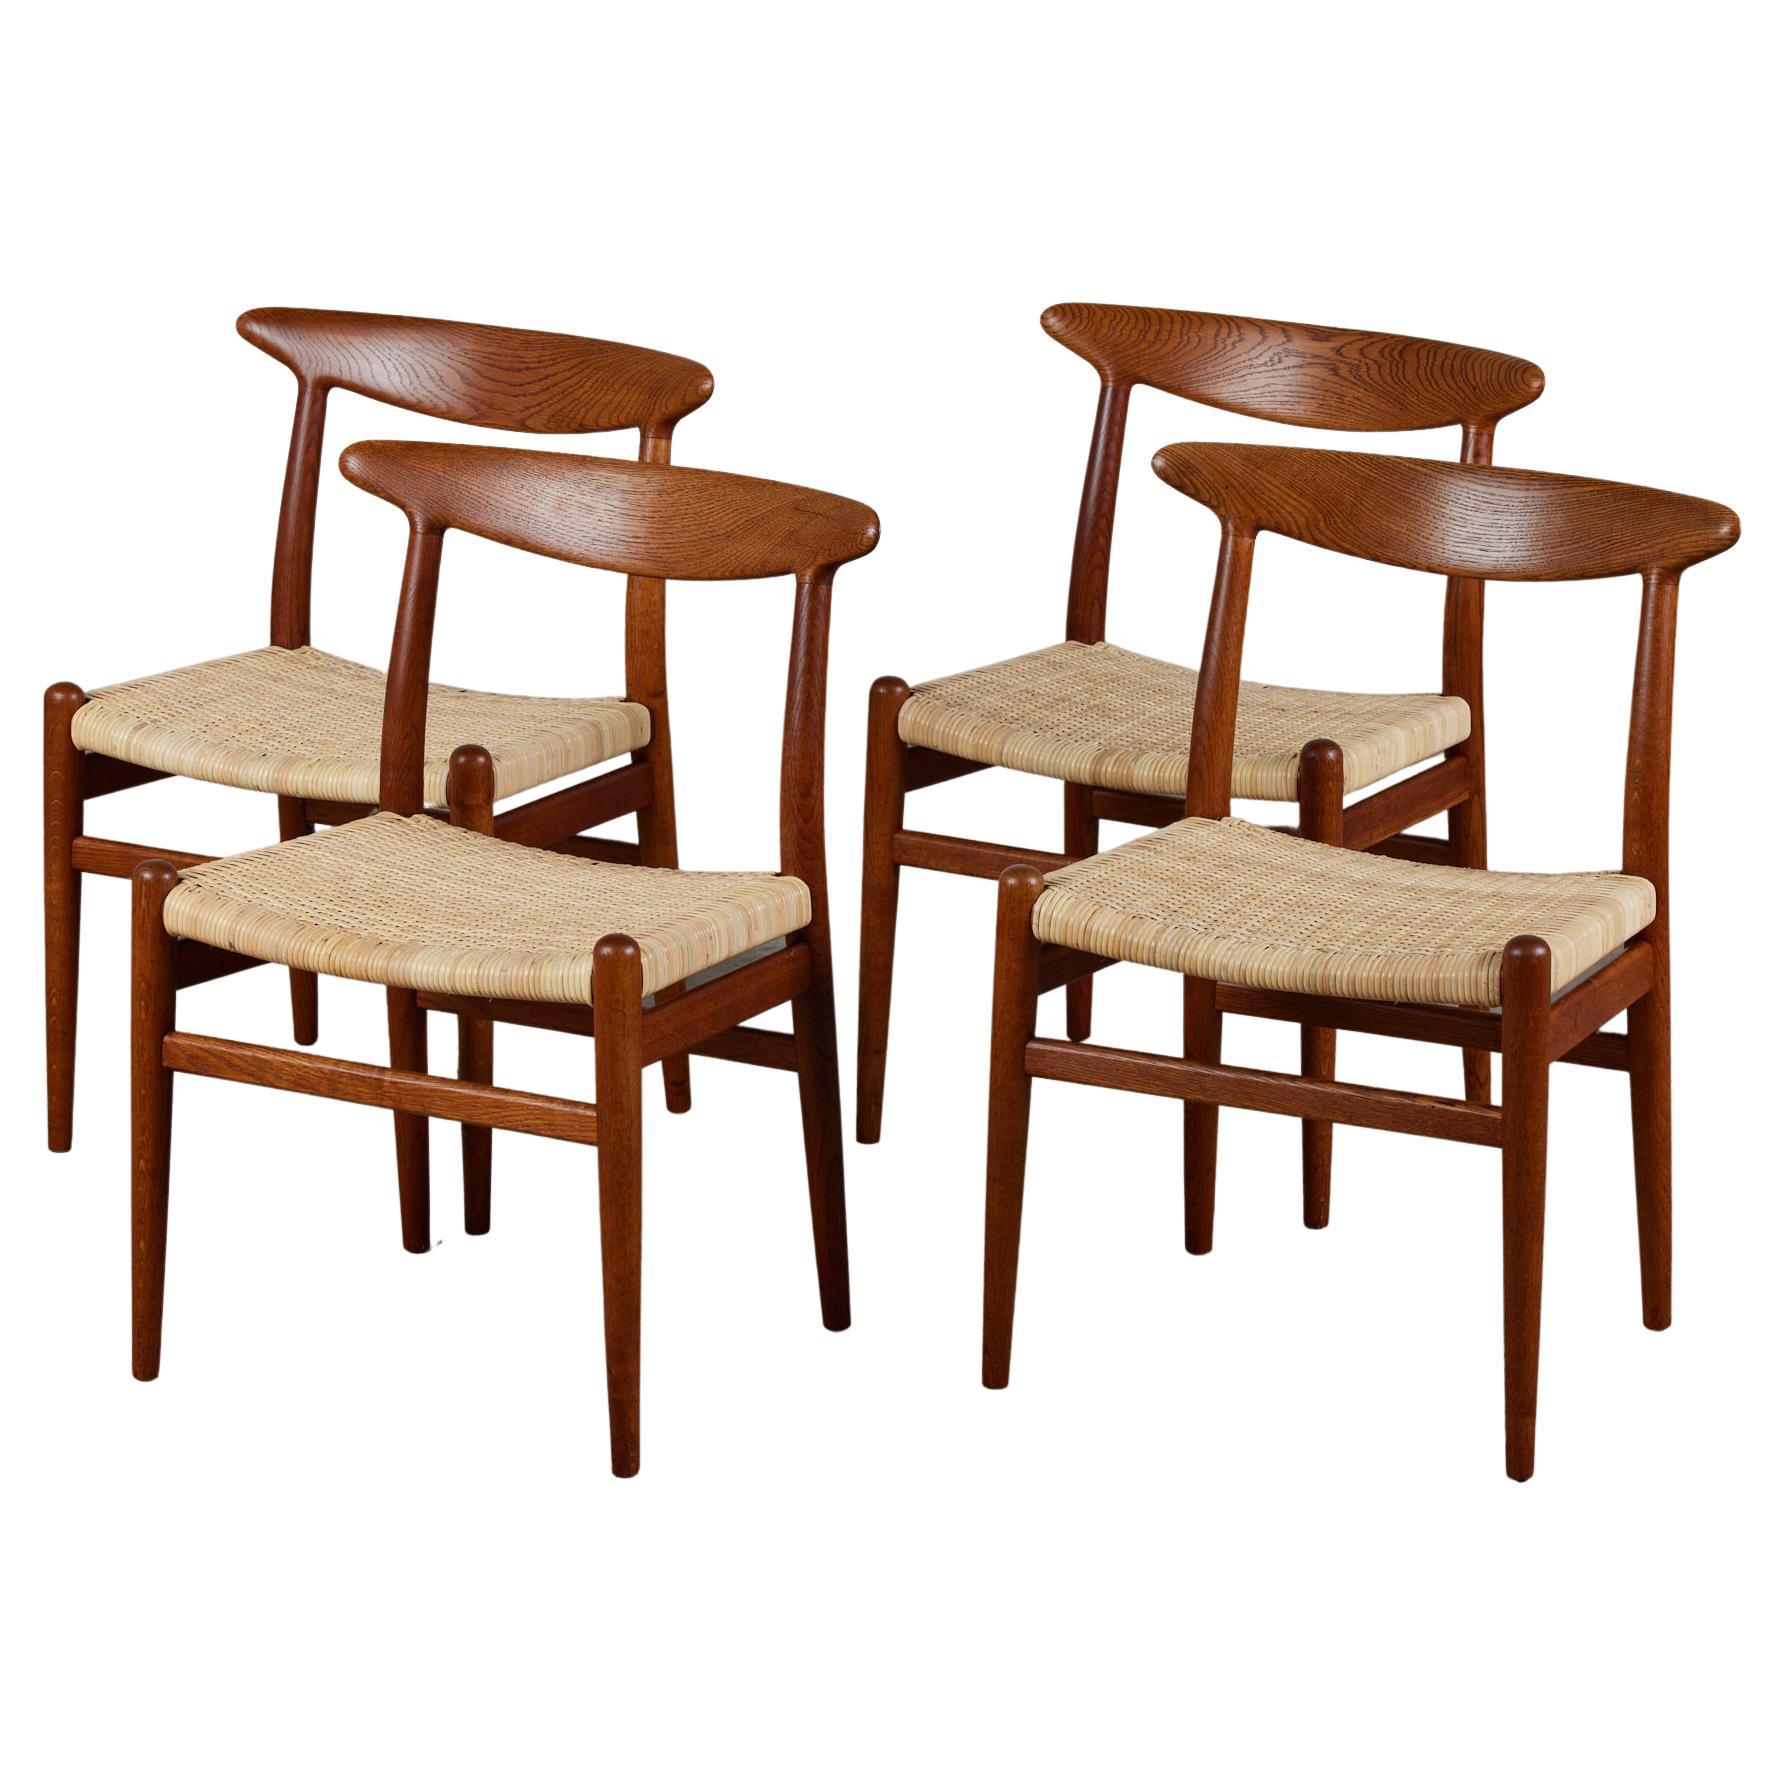 Set of Four Hans Wegner W2 Dining Chairs for C.M. Madsen